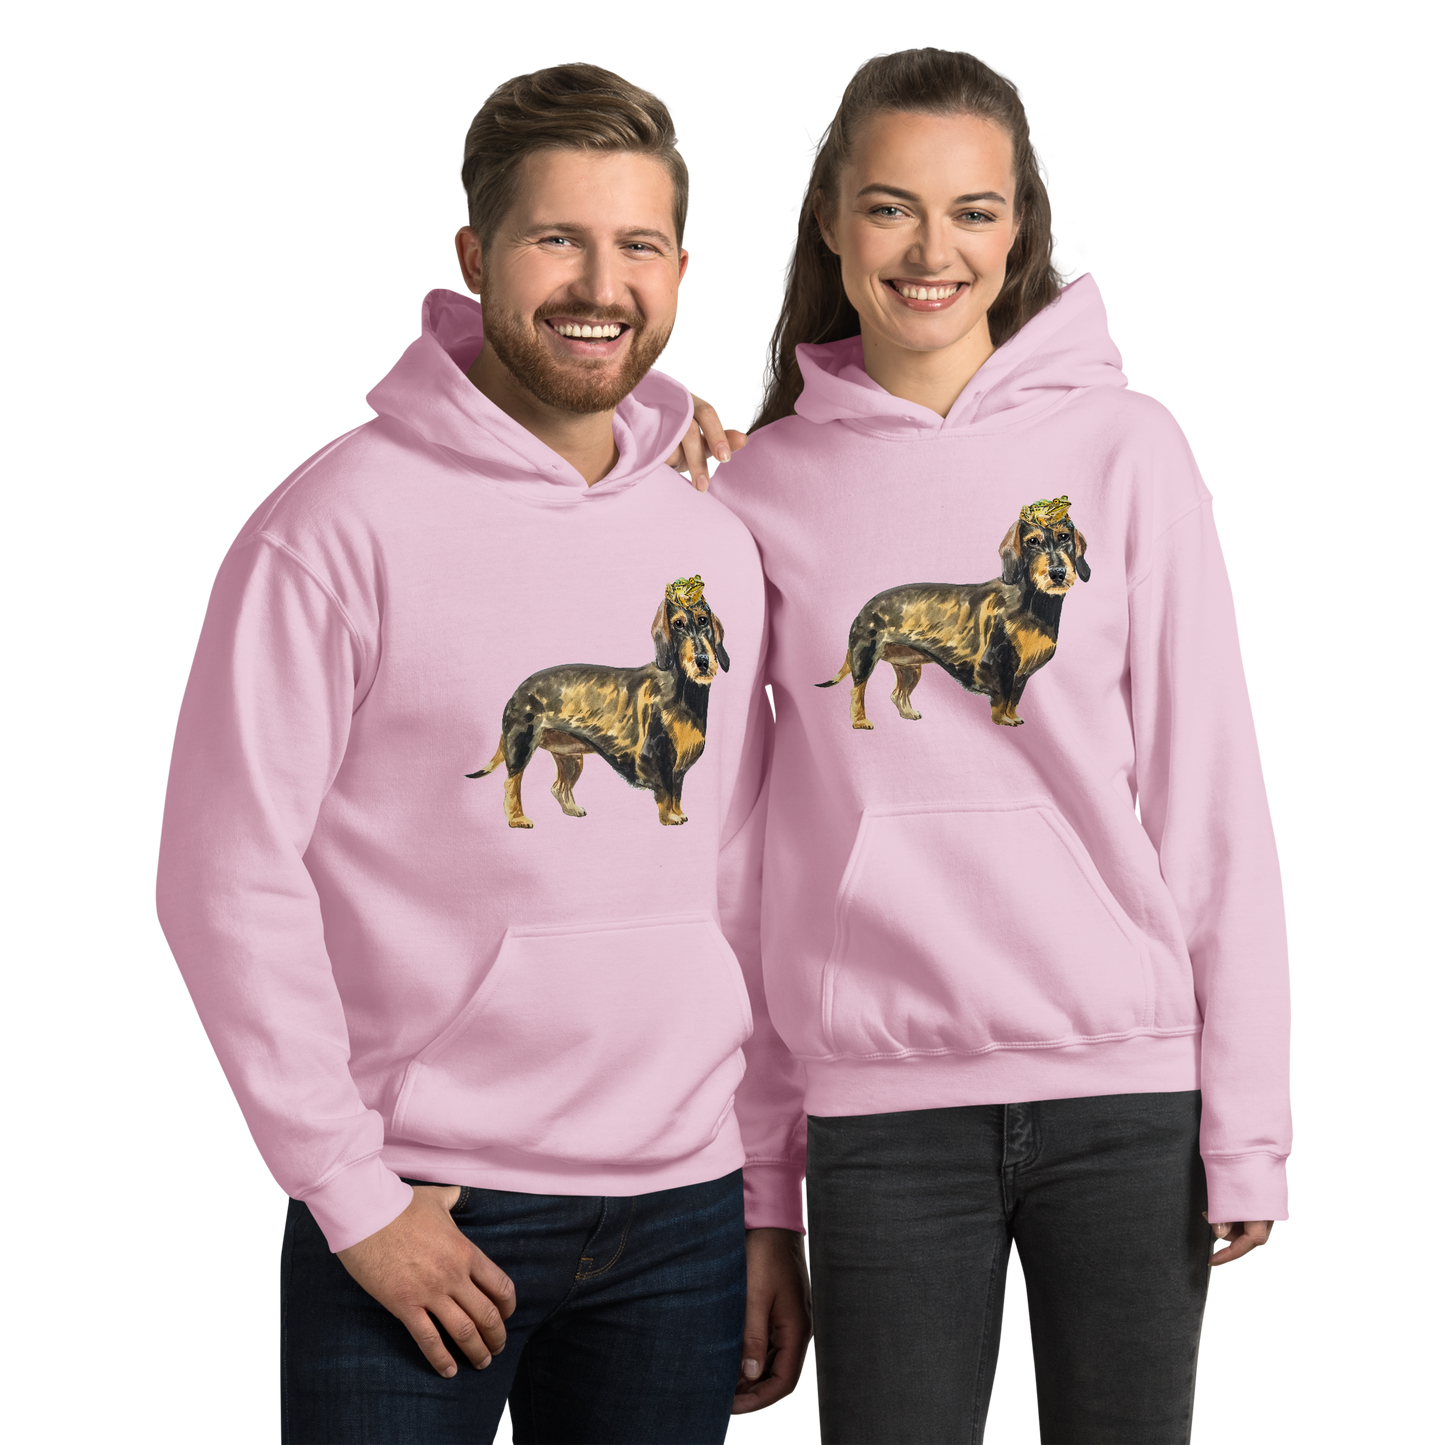 Smiling man and woman wearing a Light Pink Dachshund Hoodie featuring an adorable Frog on a Dachshund's Head graphic on the chest - Cute Graphic Dachshund Hoodies - Boozy Fox